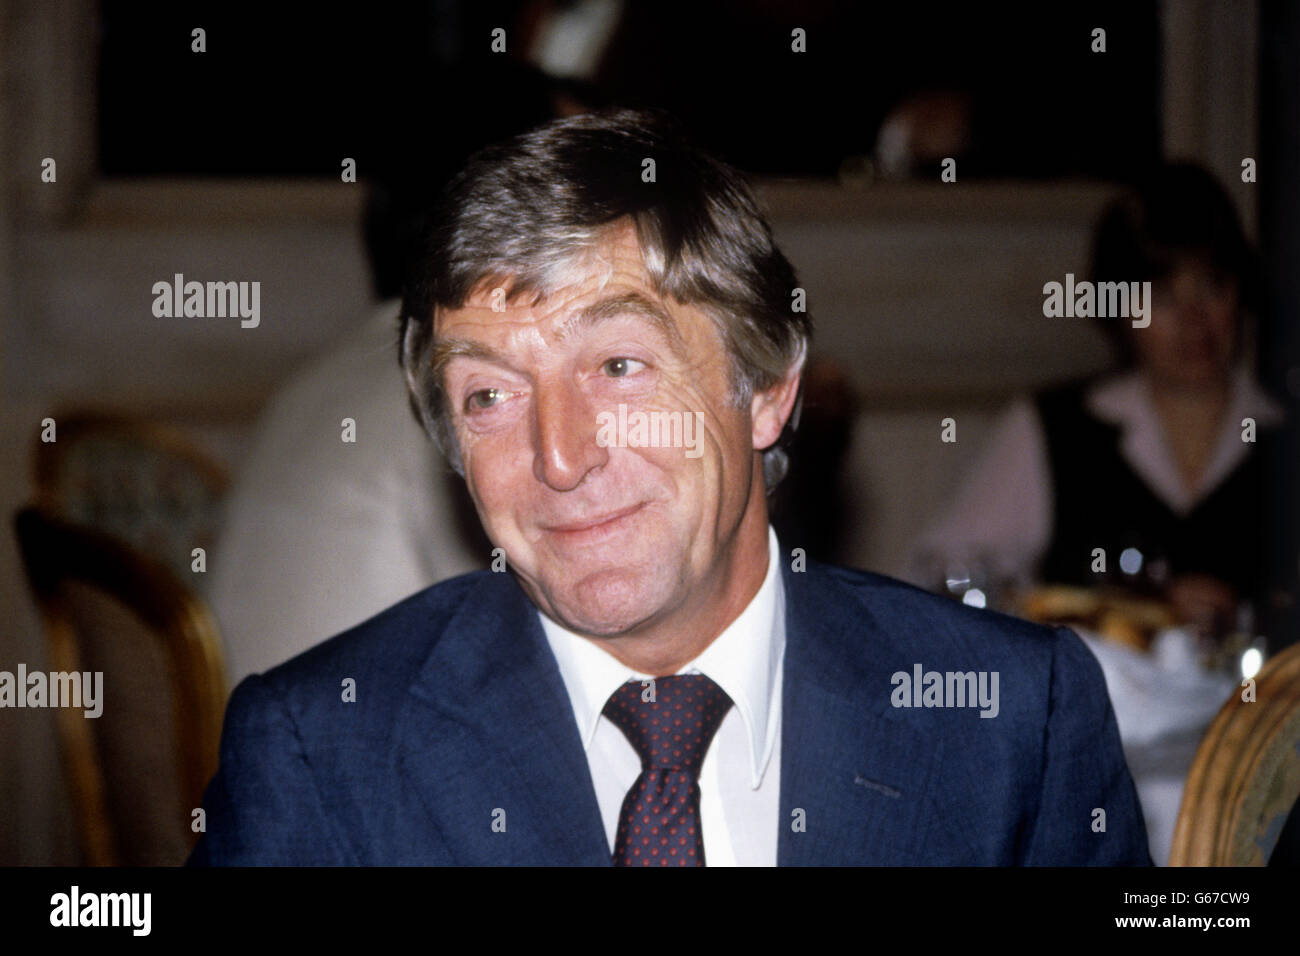 Saturday night's chat show host for BBC tv, Michael Parkinson, at a breakfast press meeting at the Inn on the Park, London, after returning from a season in Australia. Stock Photo